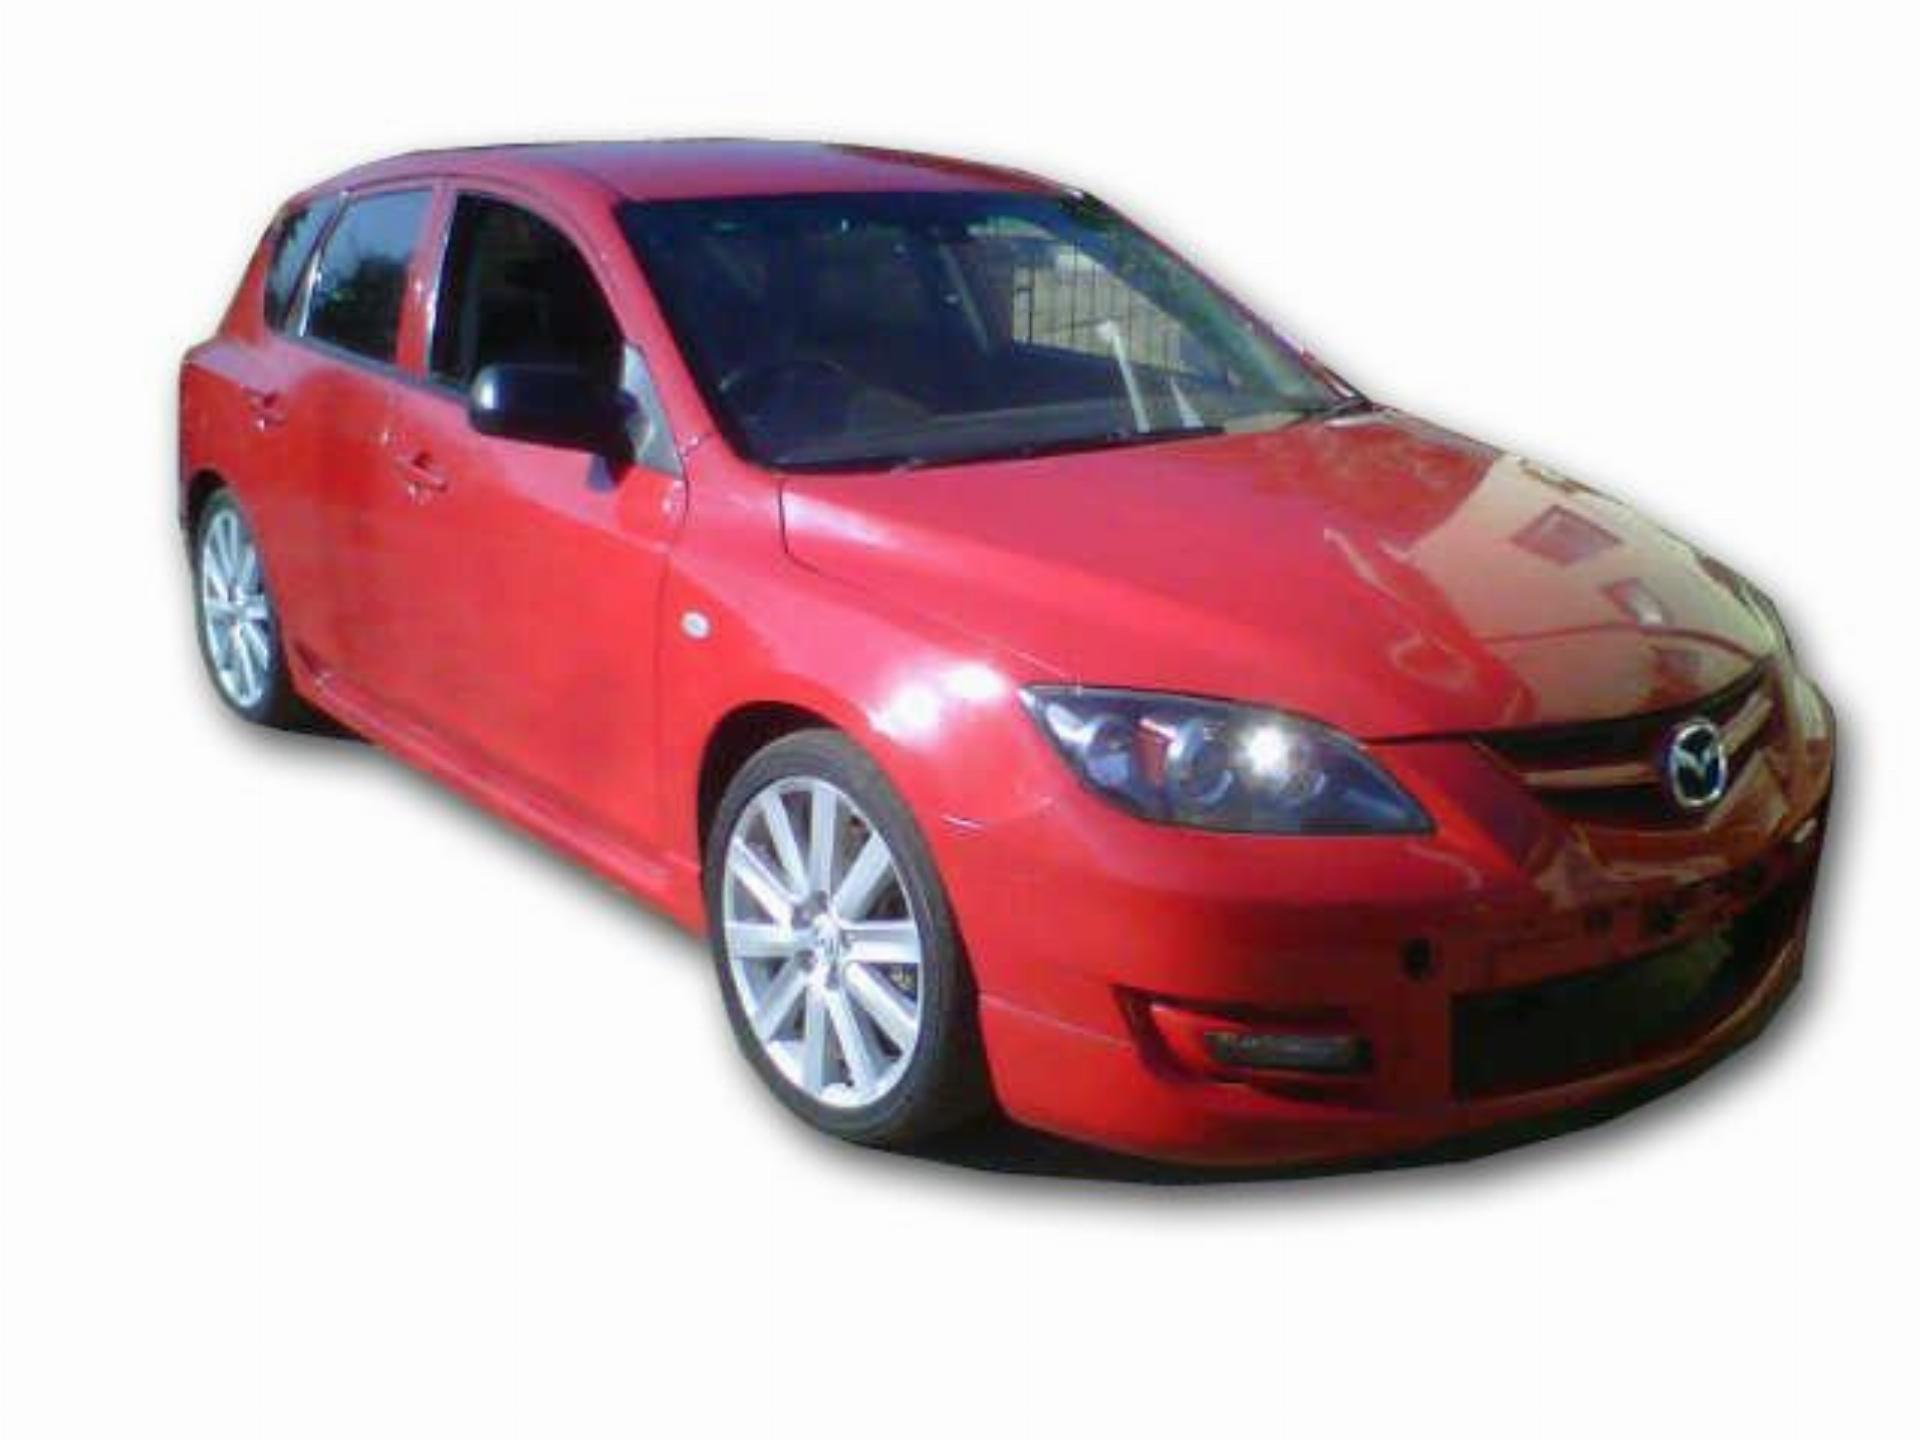 Used Mazda 2.3 MPS 2009 on auction PV1000363